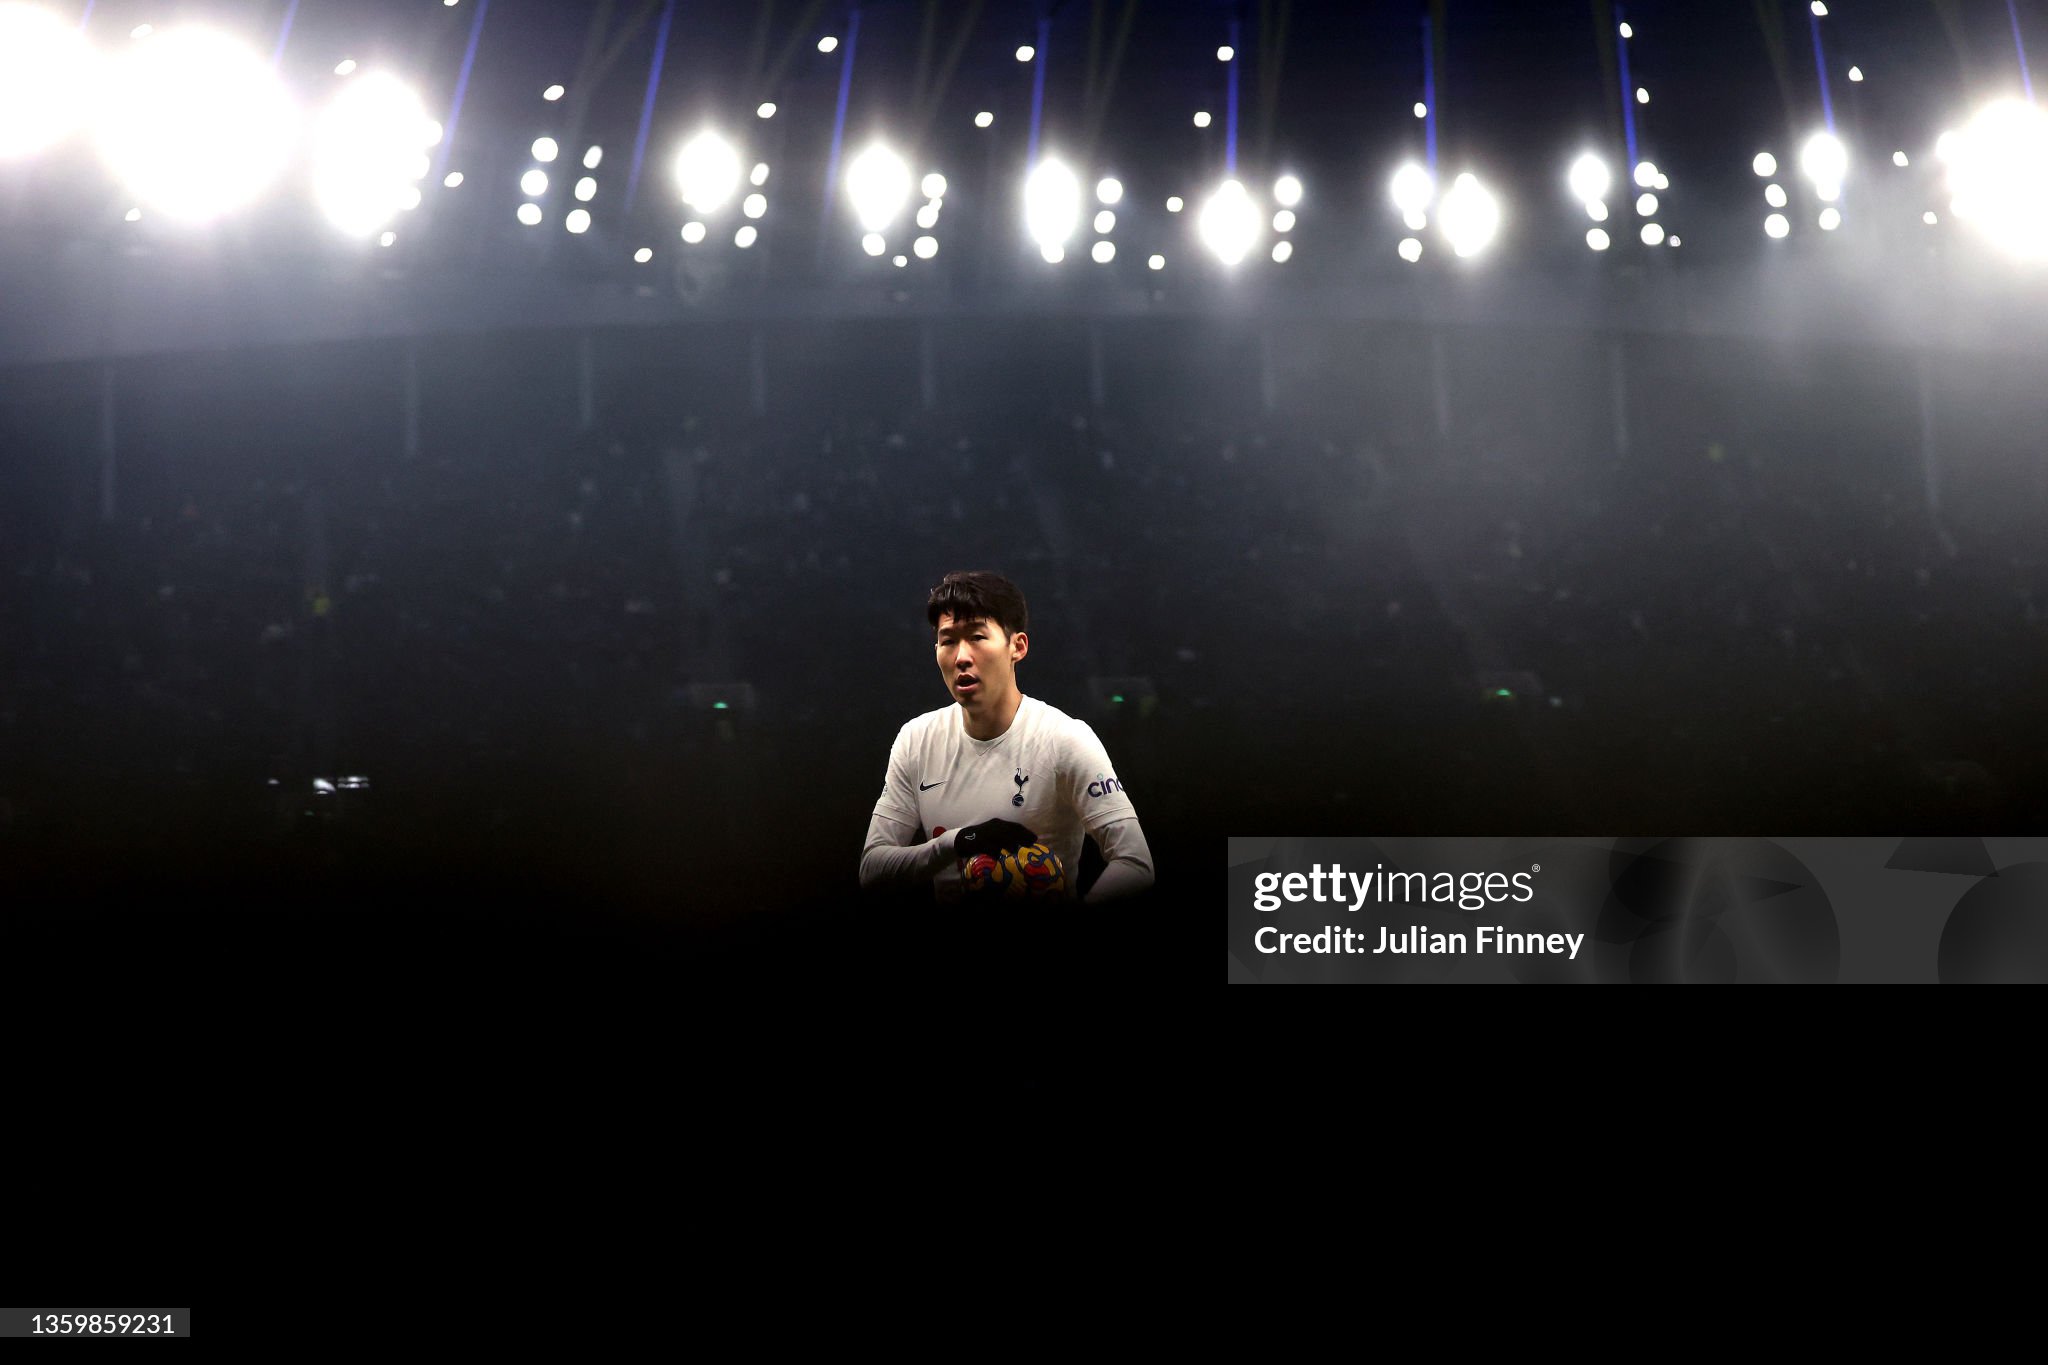 gettyimages-1359859231-2048x2048.jpg